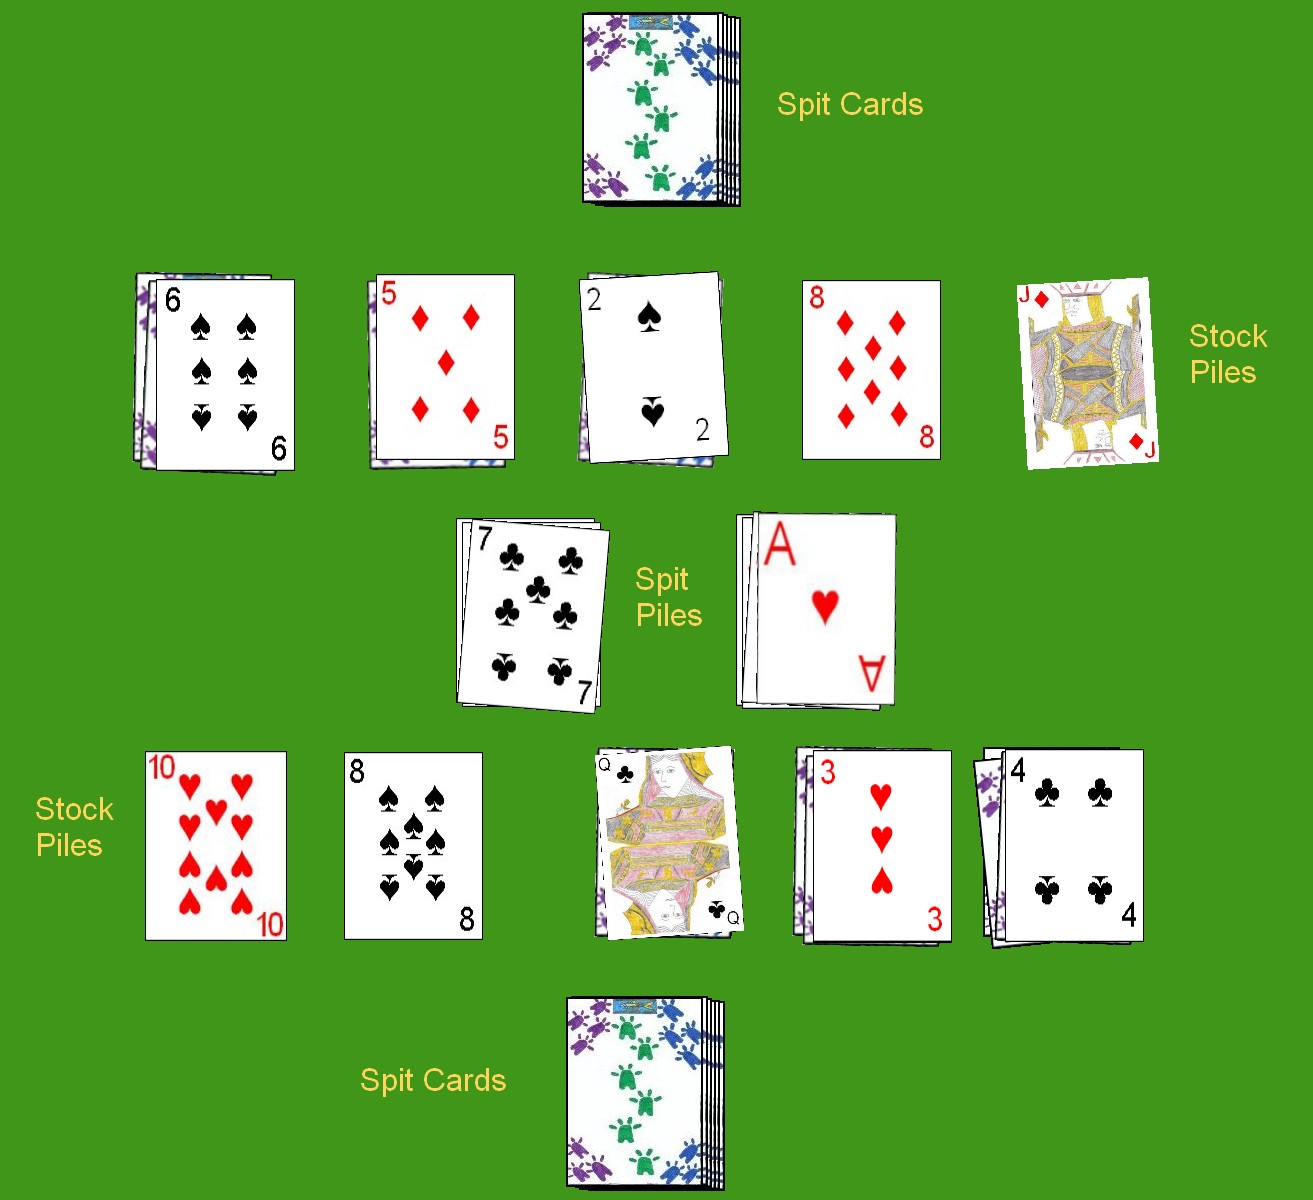 How to play Spit! #fungamestoplay #cardgames #spit